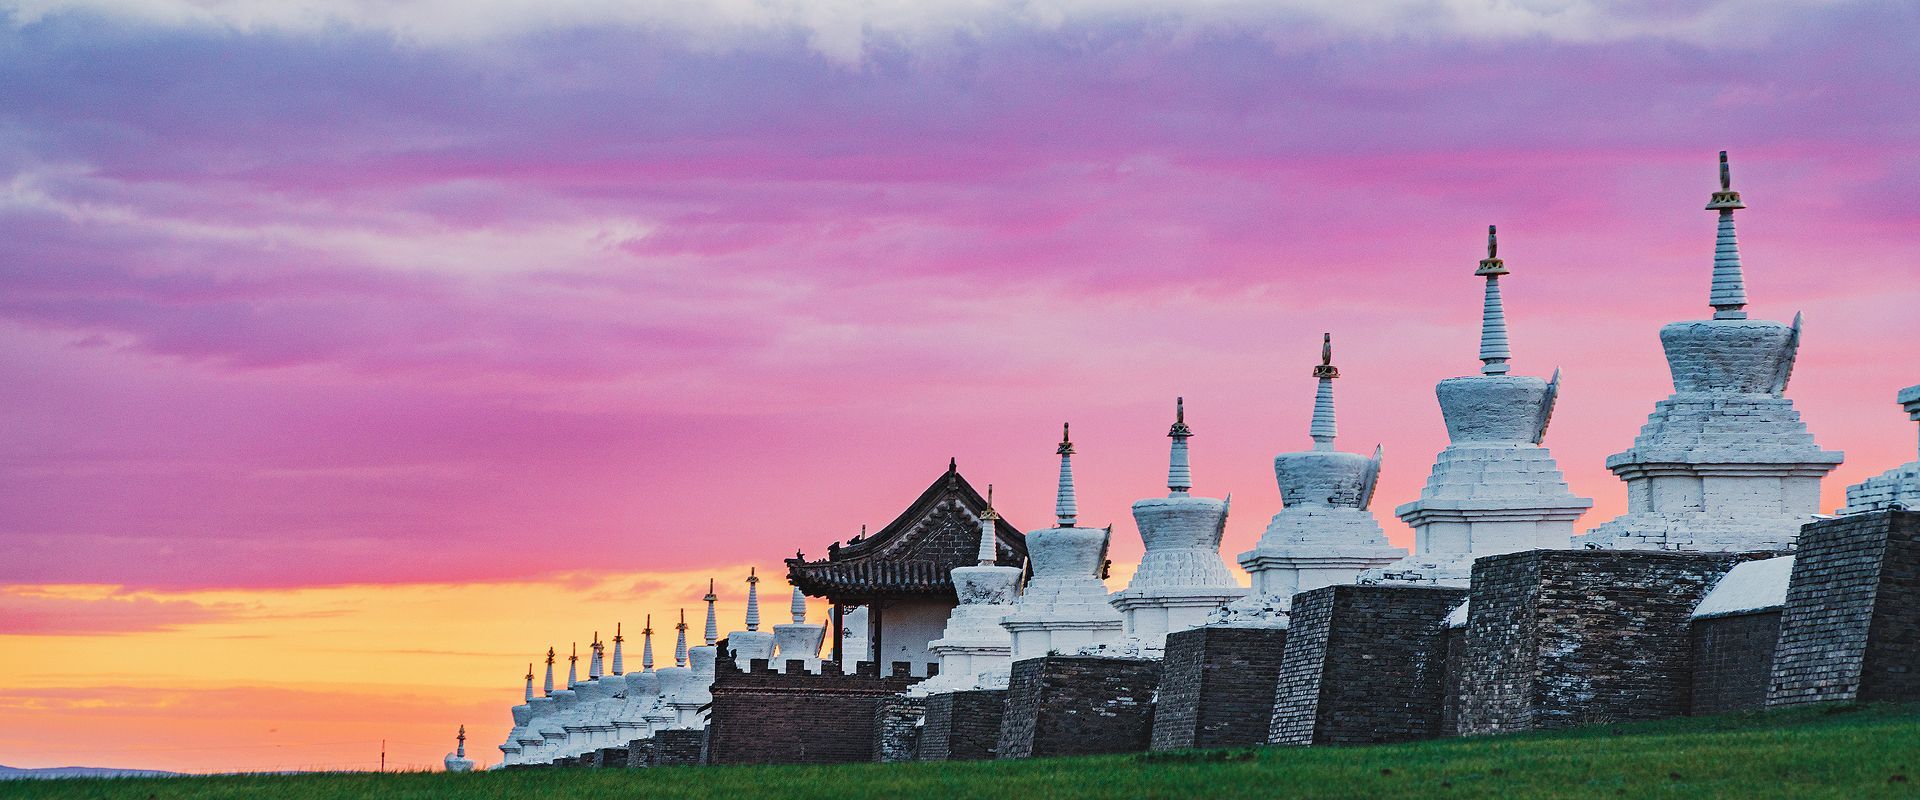 FASCINATING SACRED SITES OF ANCIENT CAPITAL OF MONGOLIA